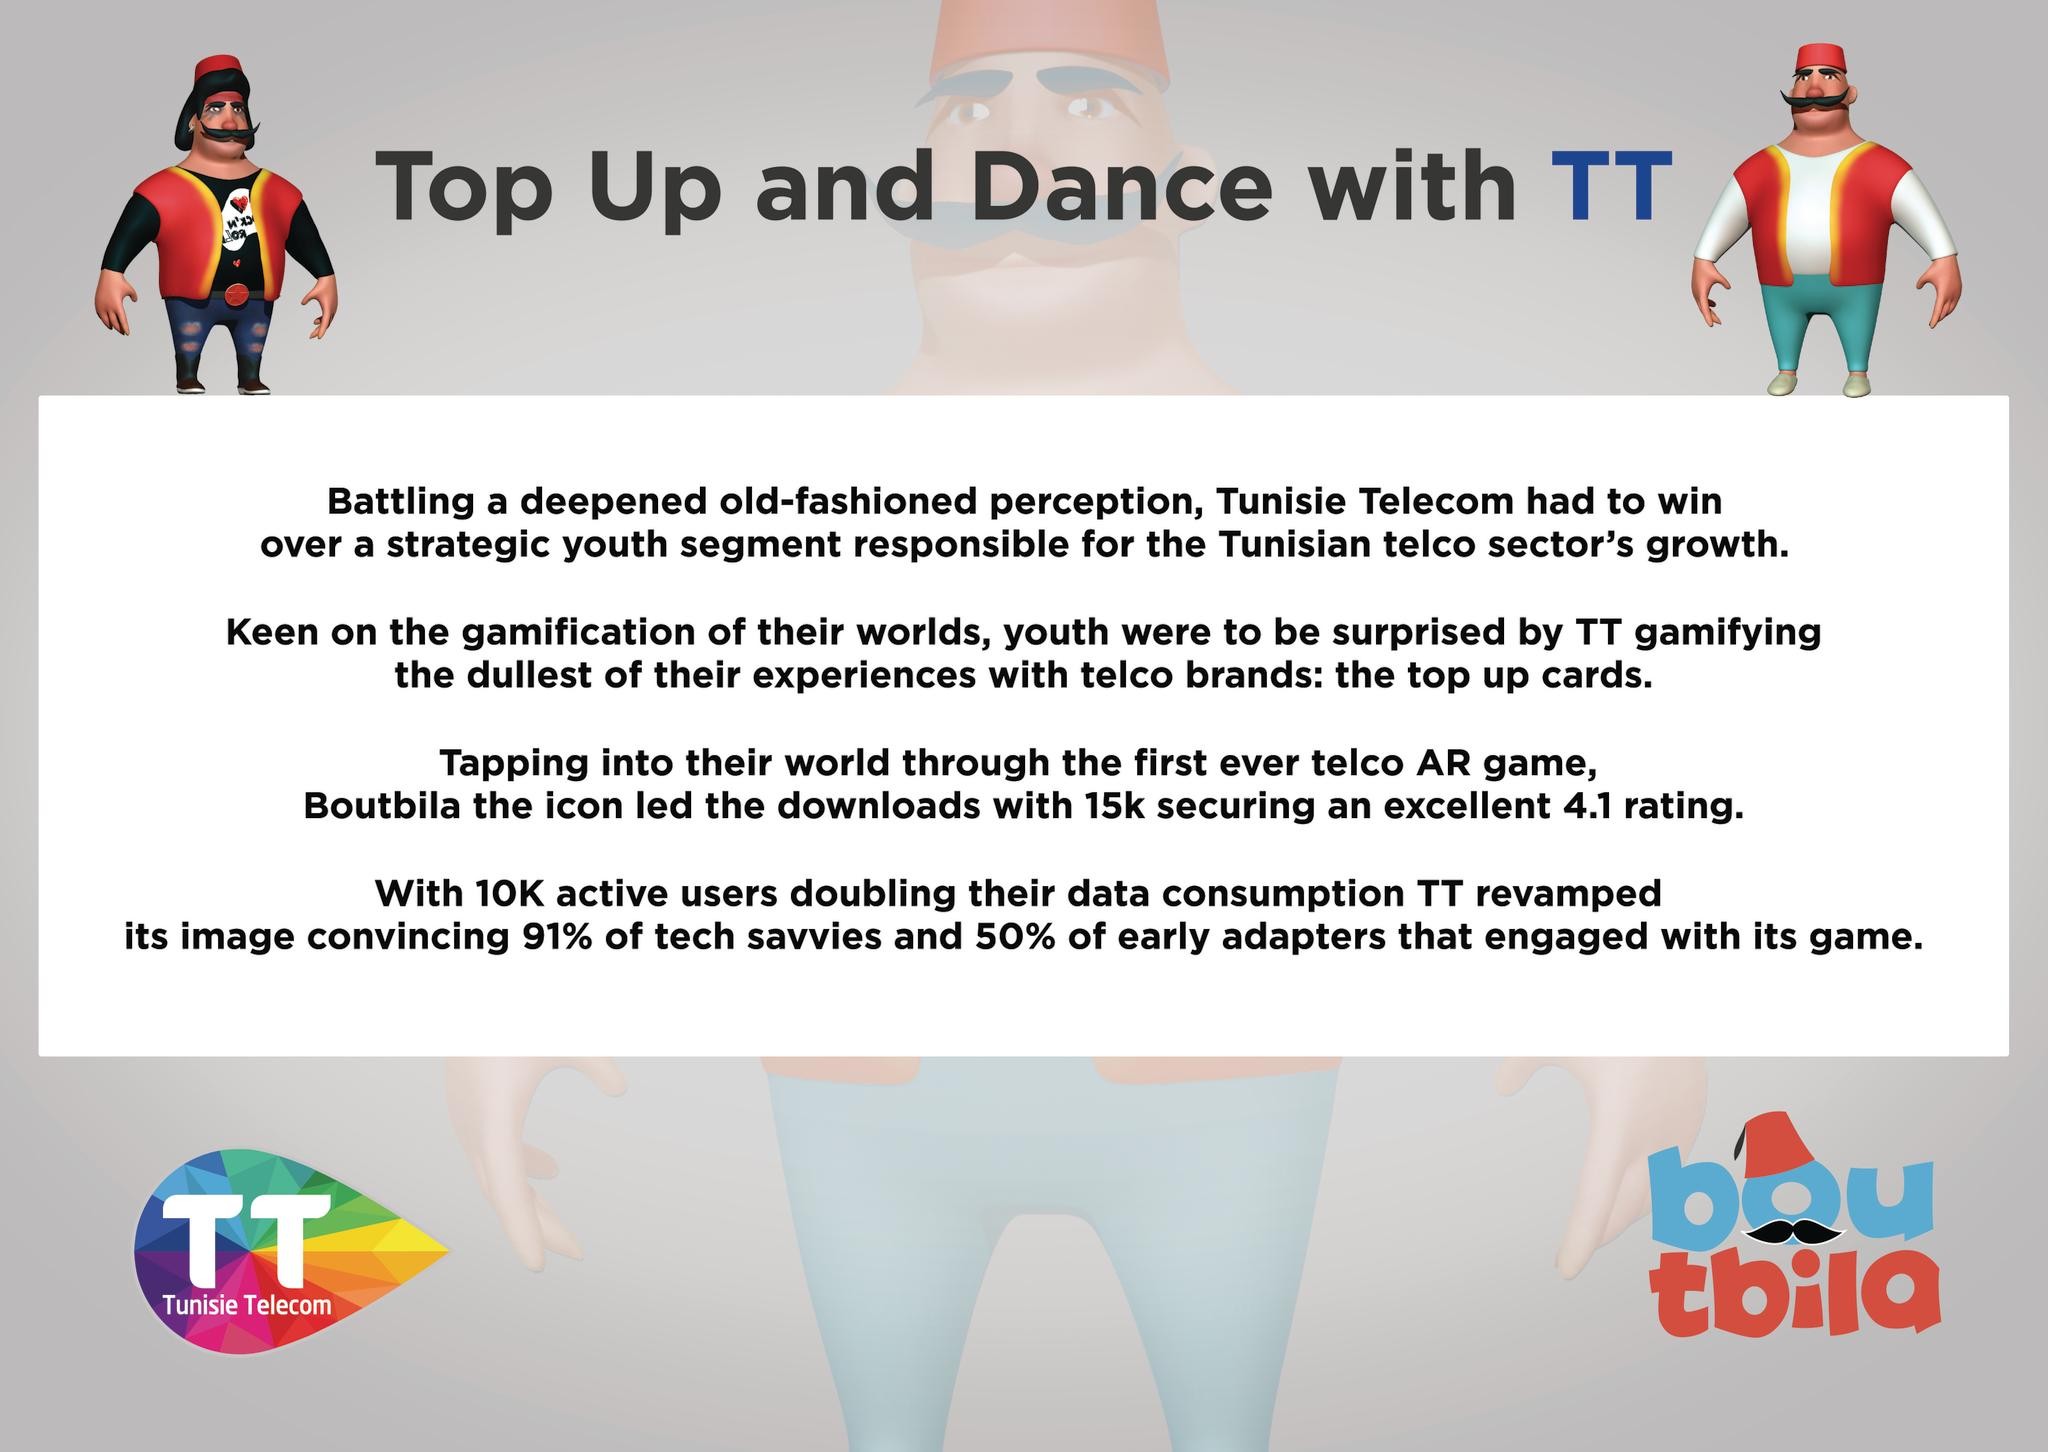 Top Up & Dance With Tunisie Telecom